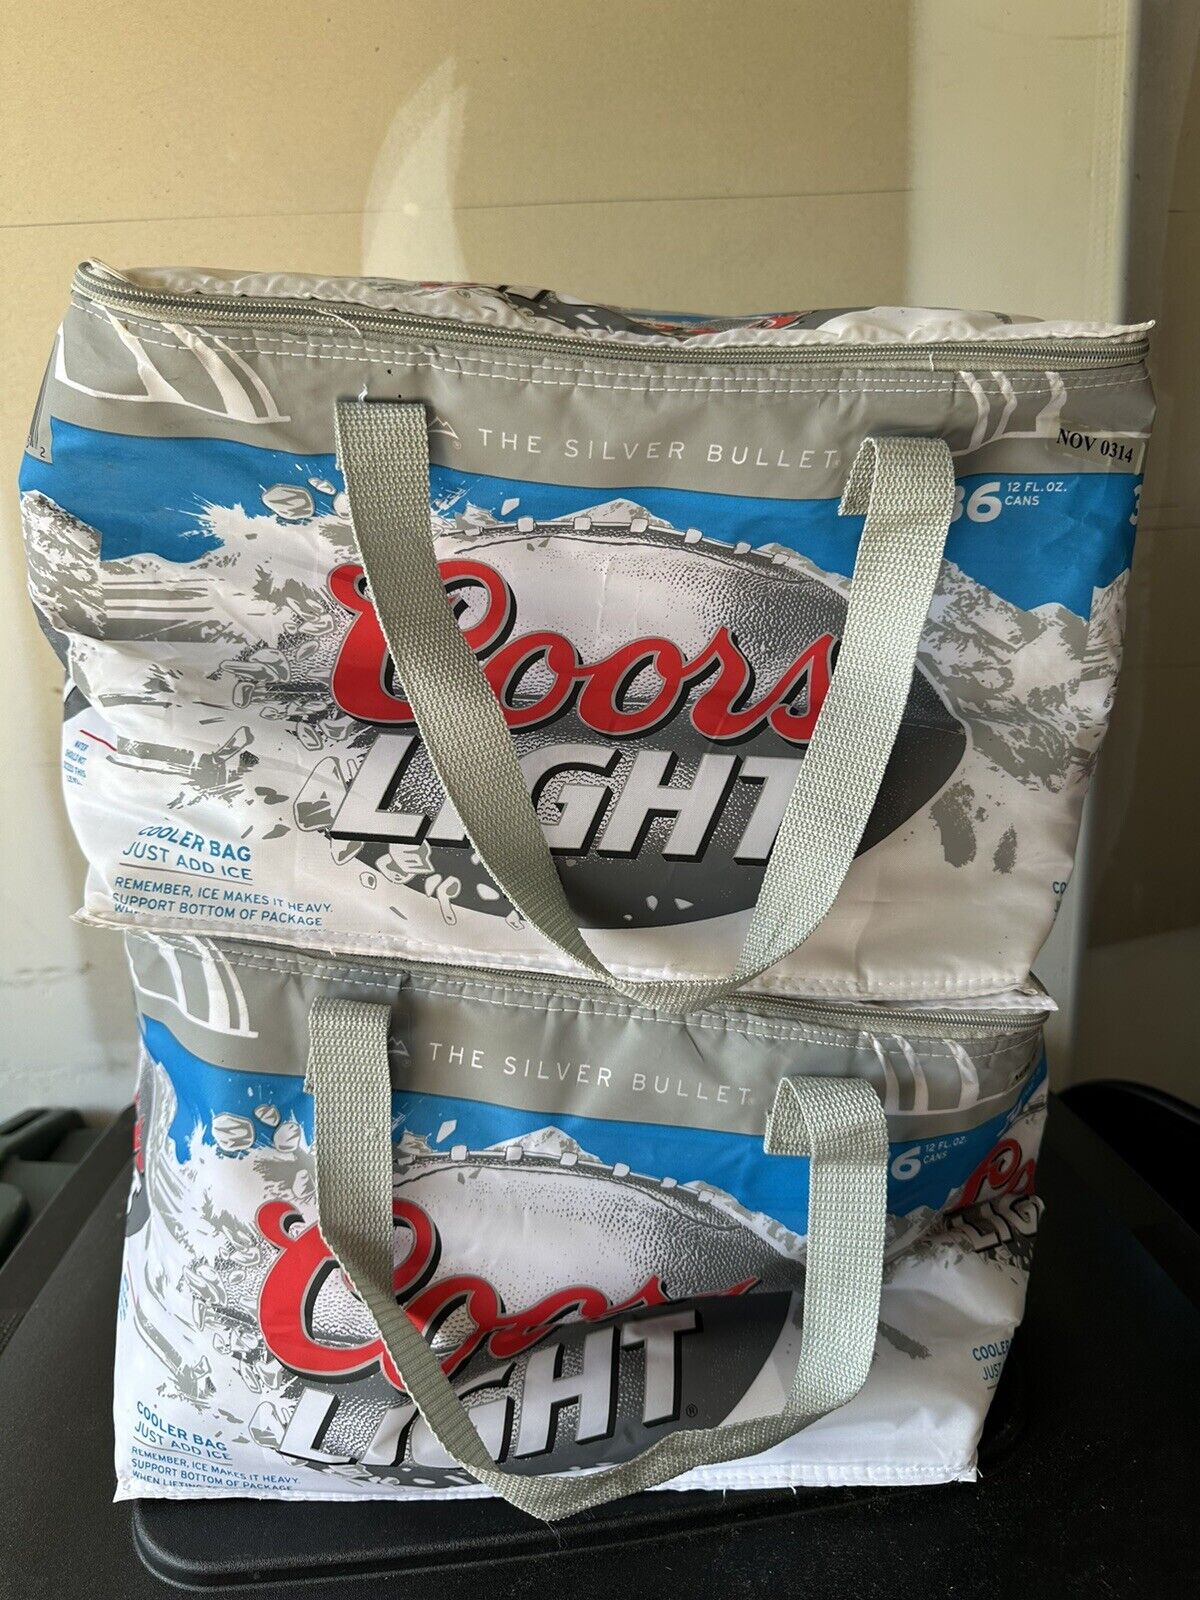 2 Coors Light The Silver Bullet Insulated Cooler Bag-36 Pack-12 oz.cans